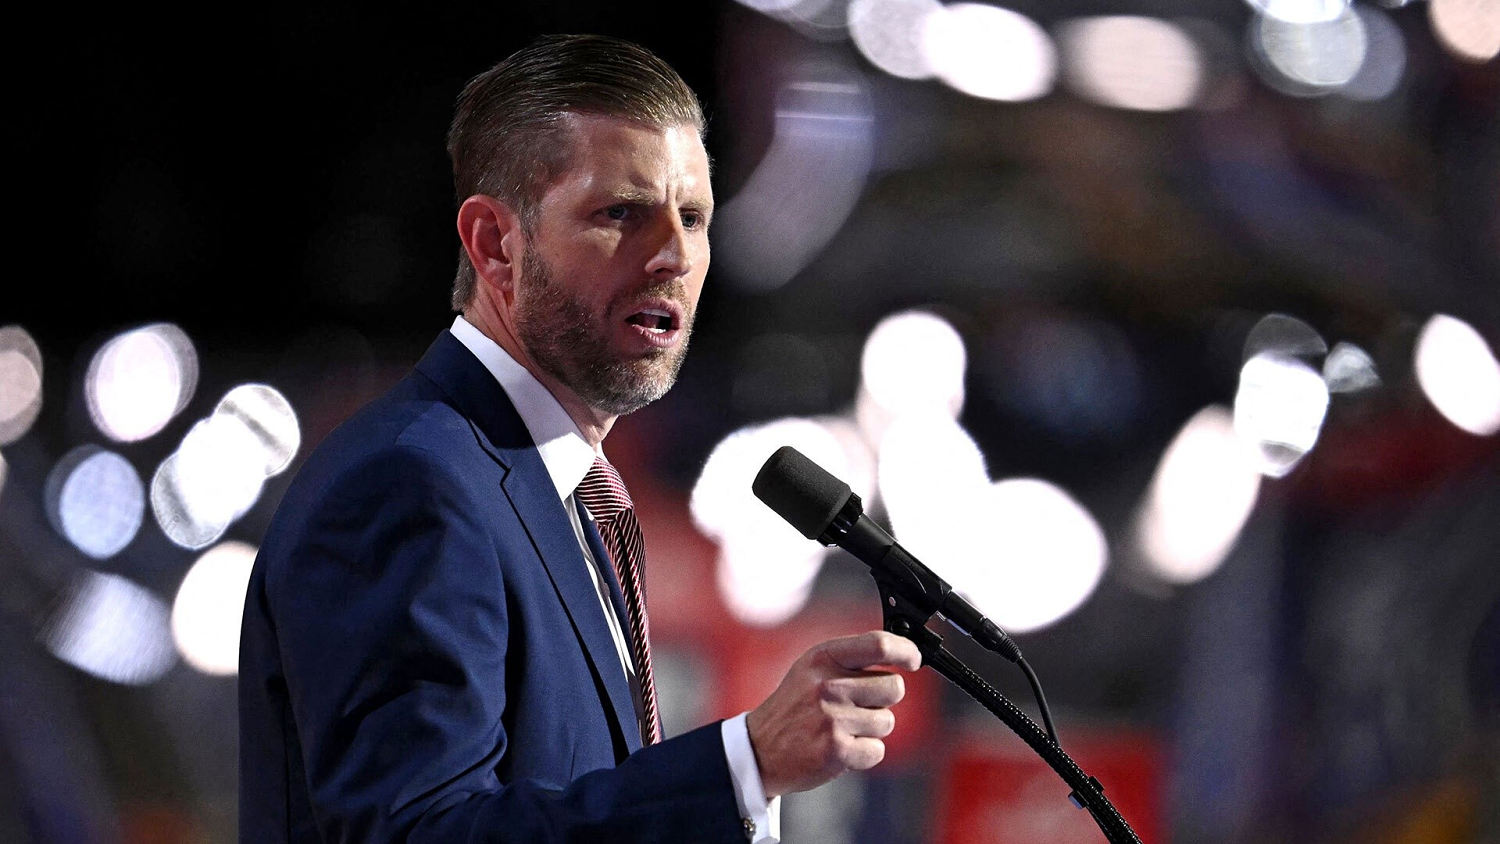 Eric Trump says his father 'restored the American dream' as president